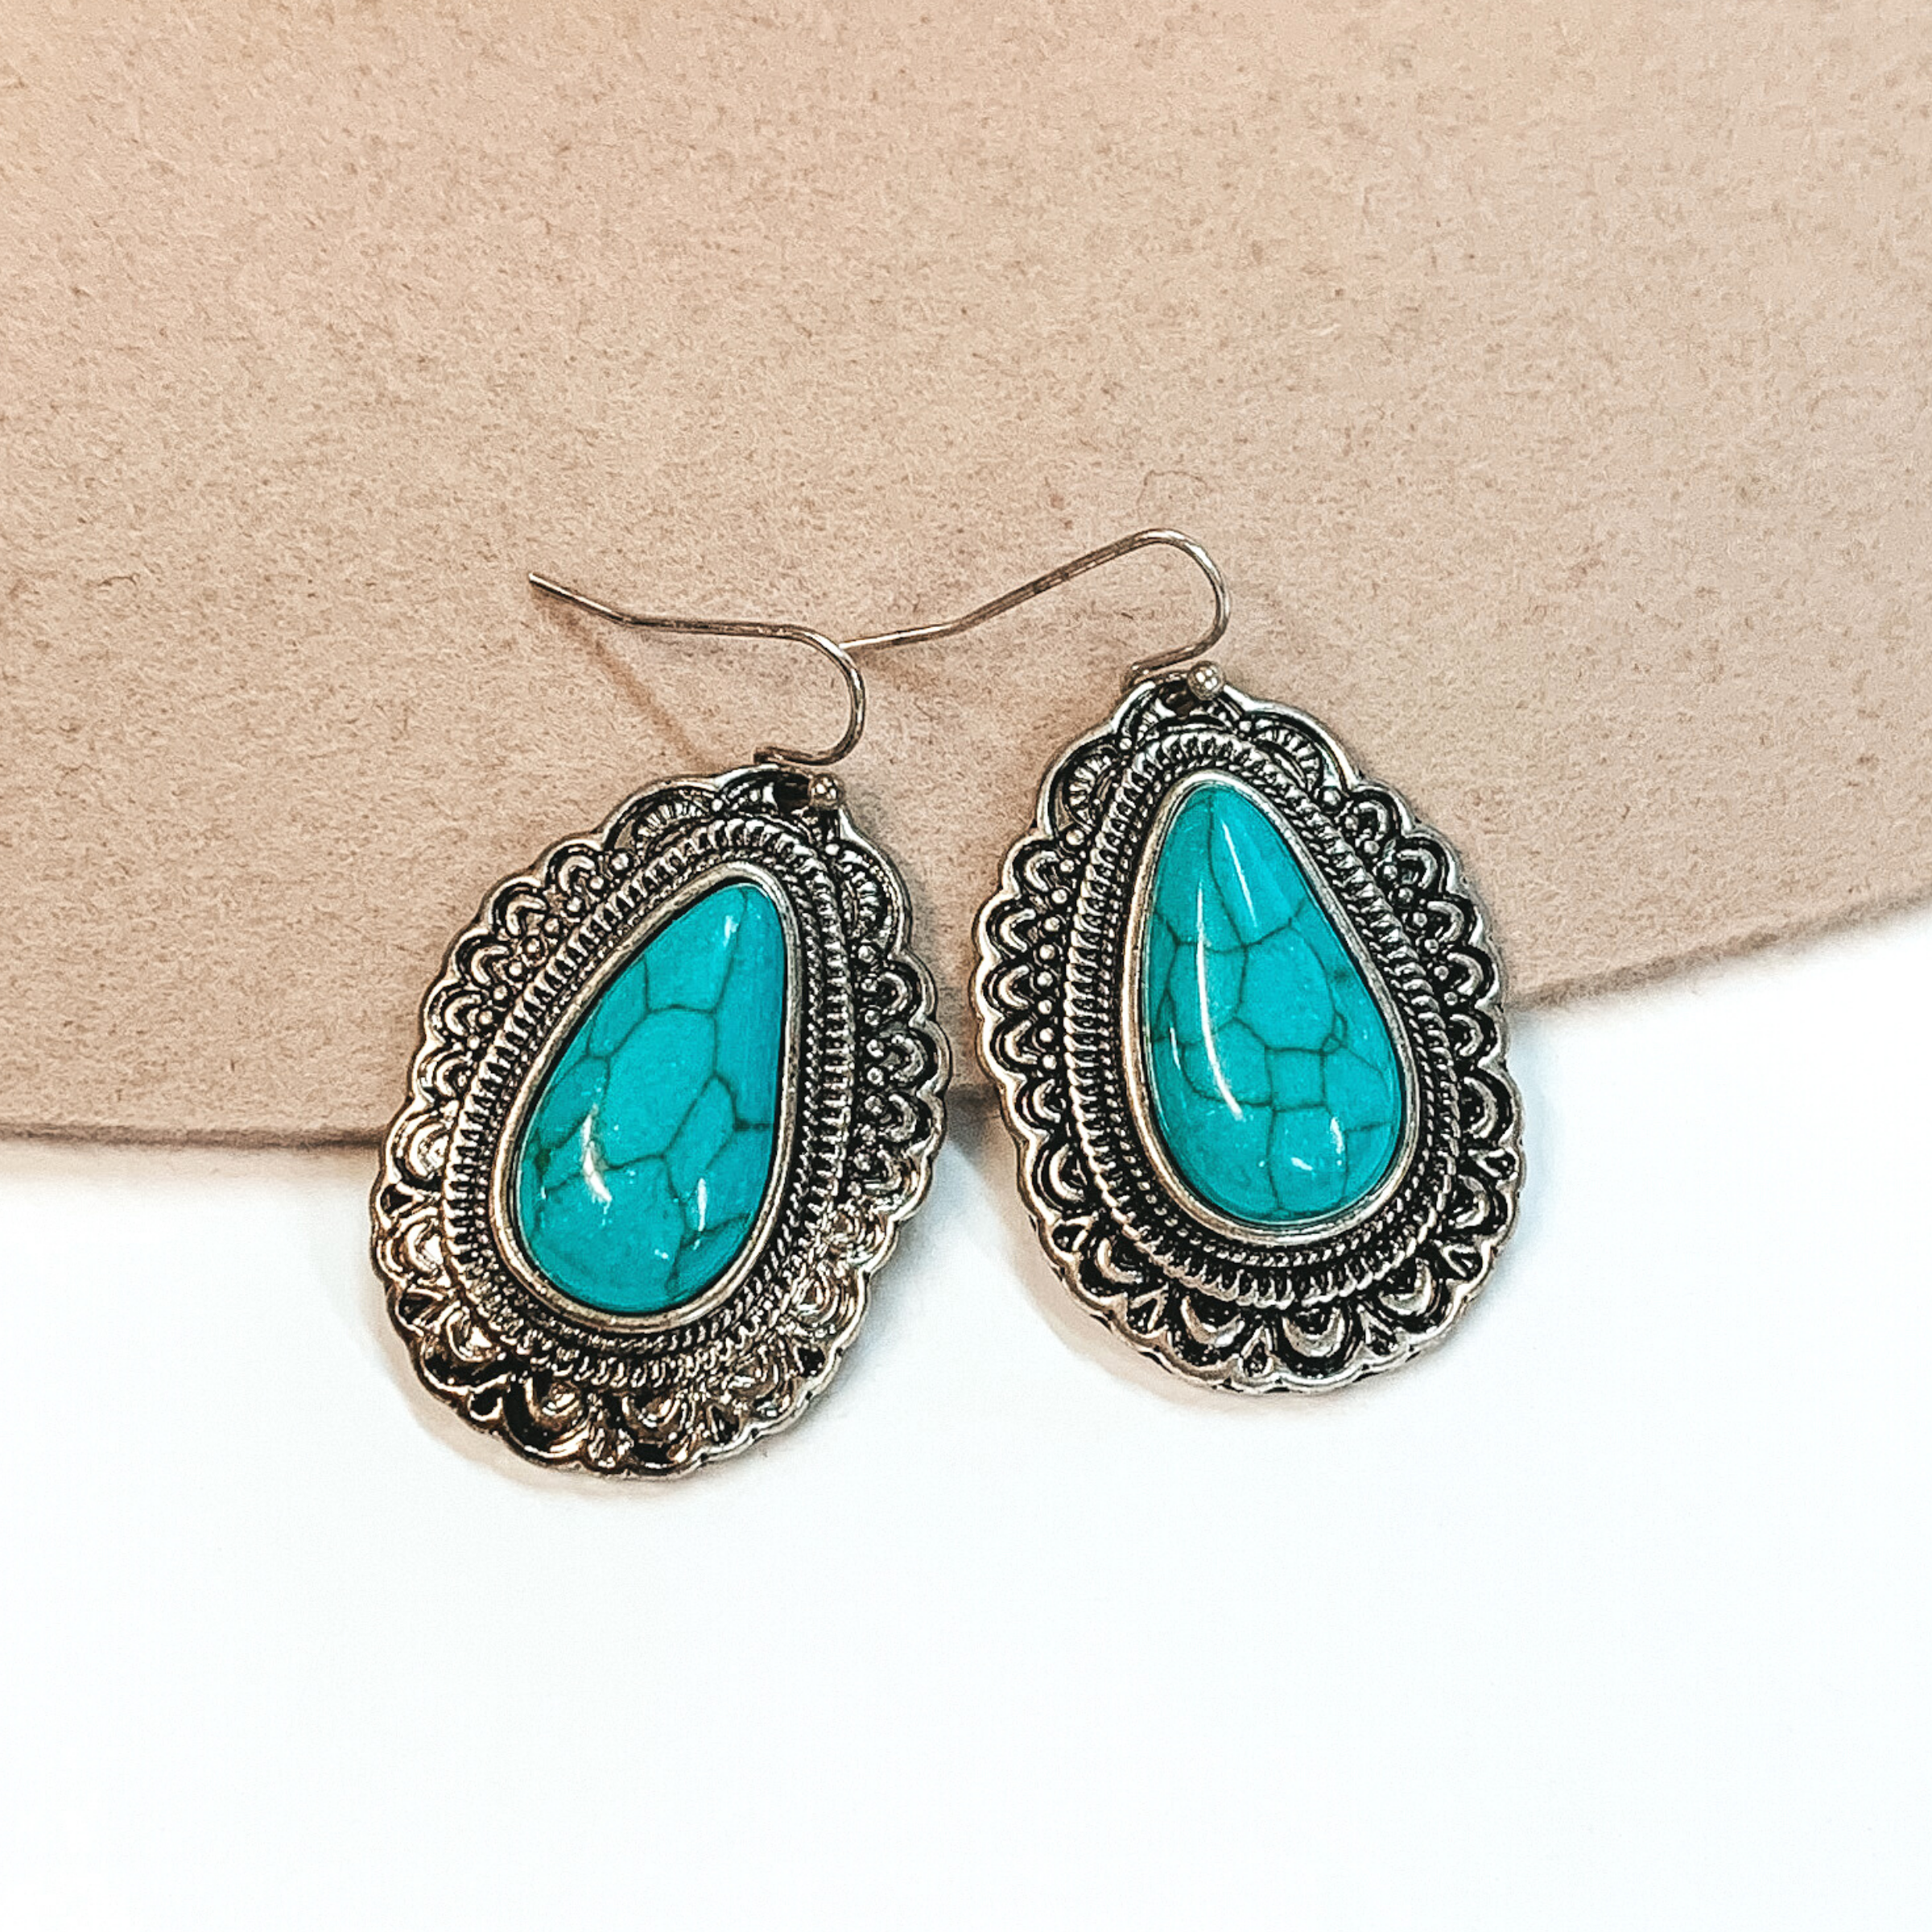 These are silver teardrop earrings in silver fish hooks with a teardrop turquoise stone. There are engraved detailing around the stone. These earrings are pictured on a white and beige background. 